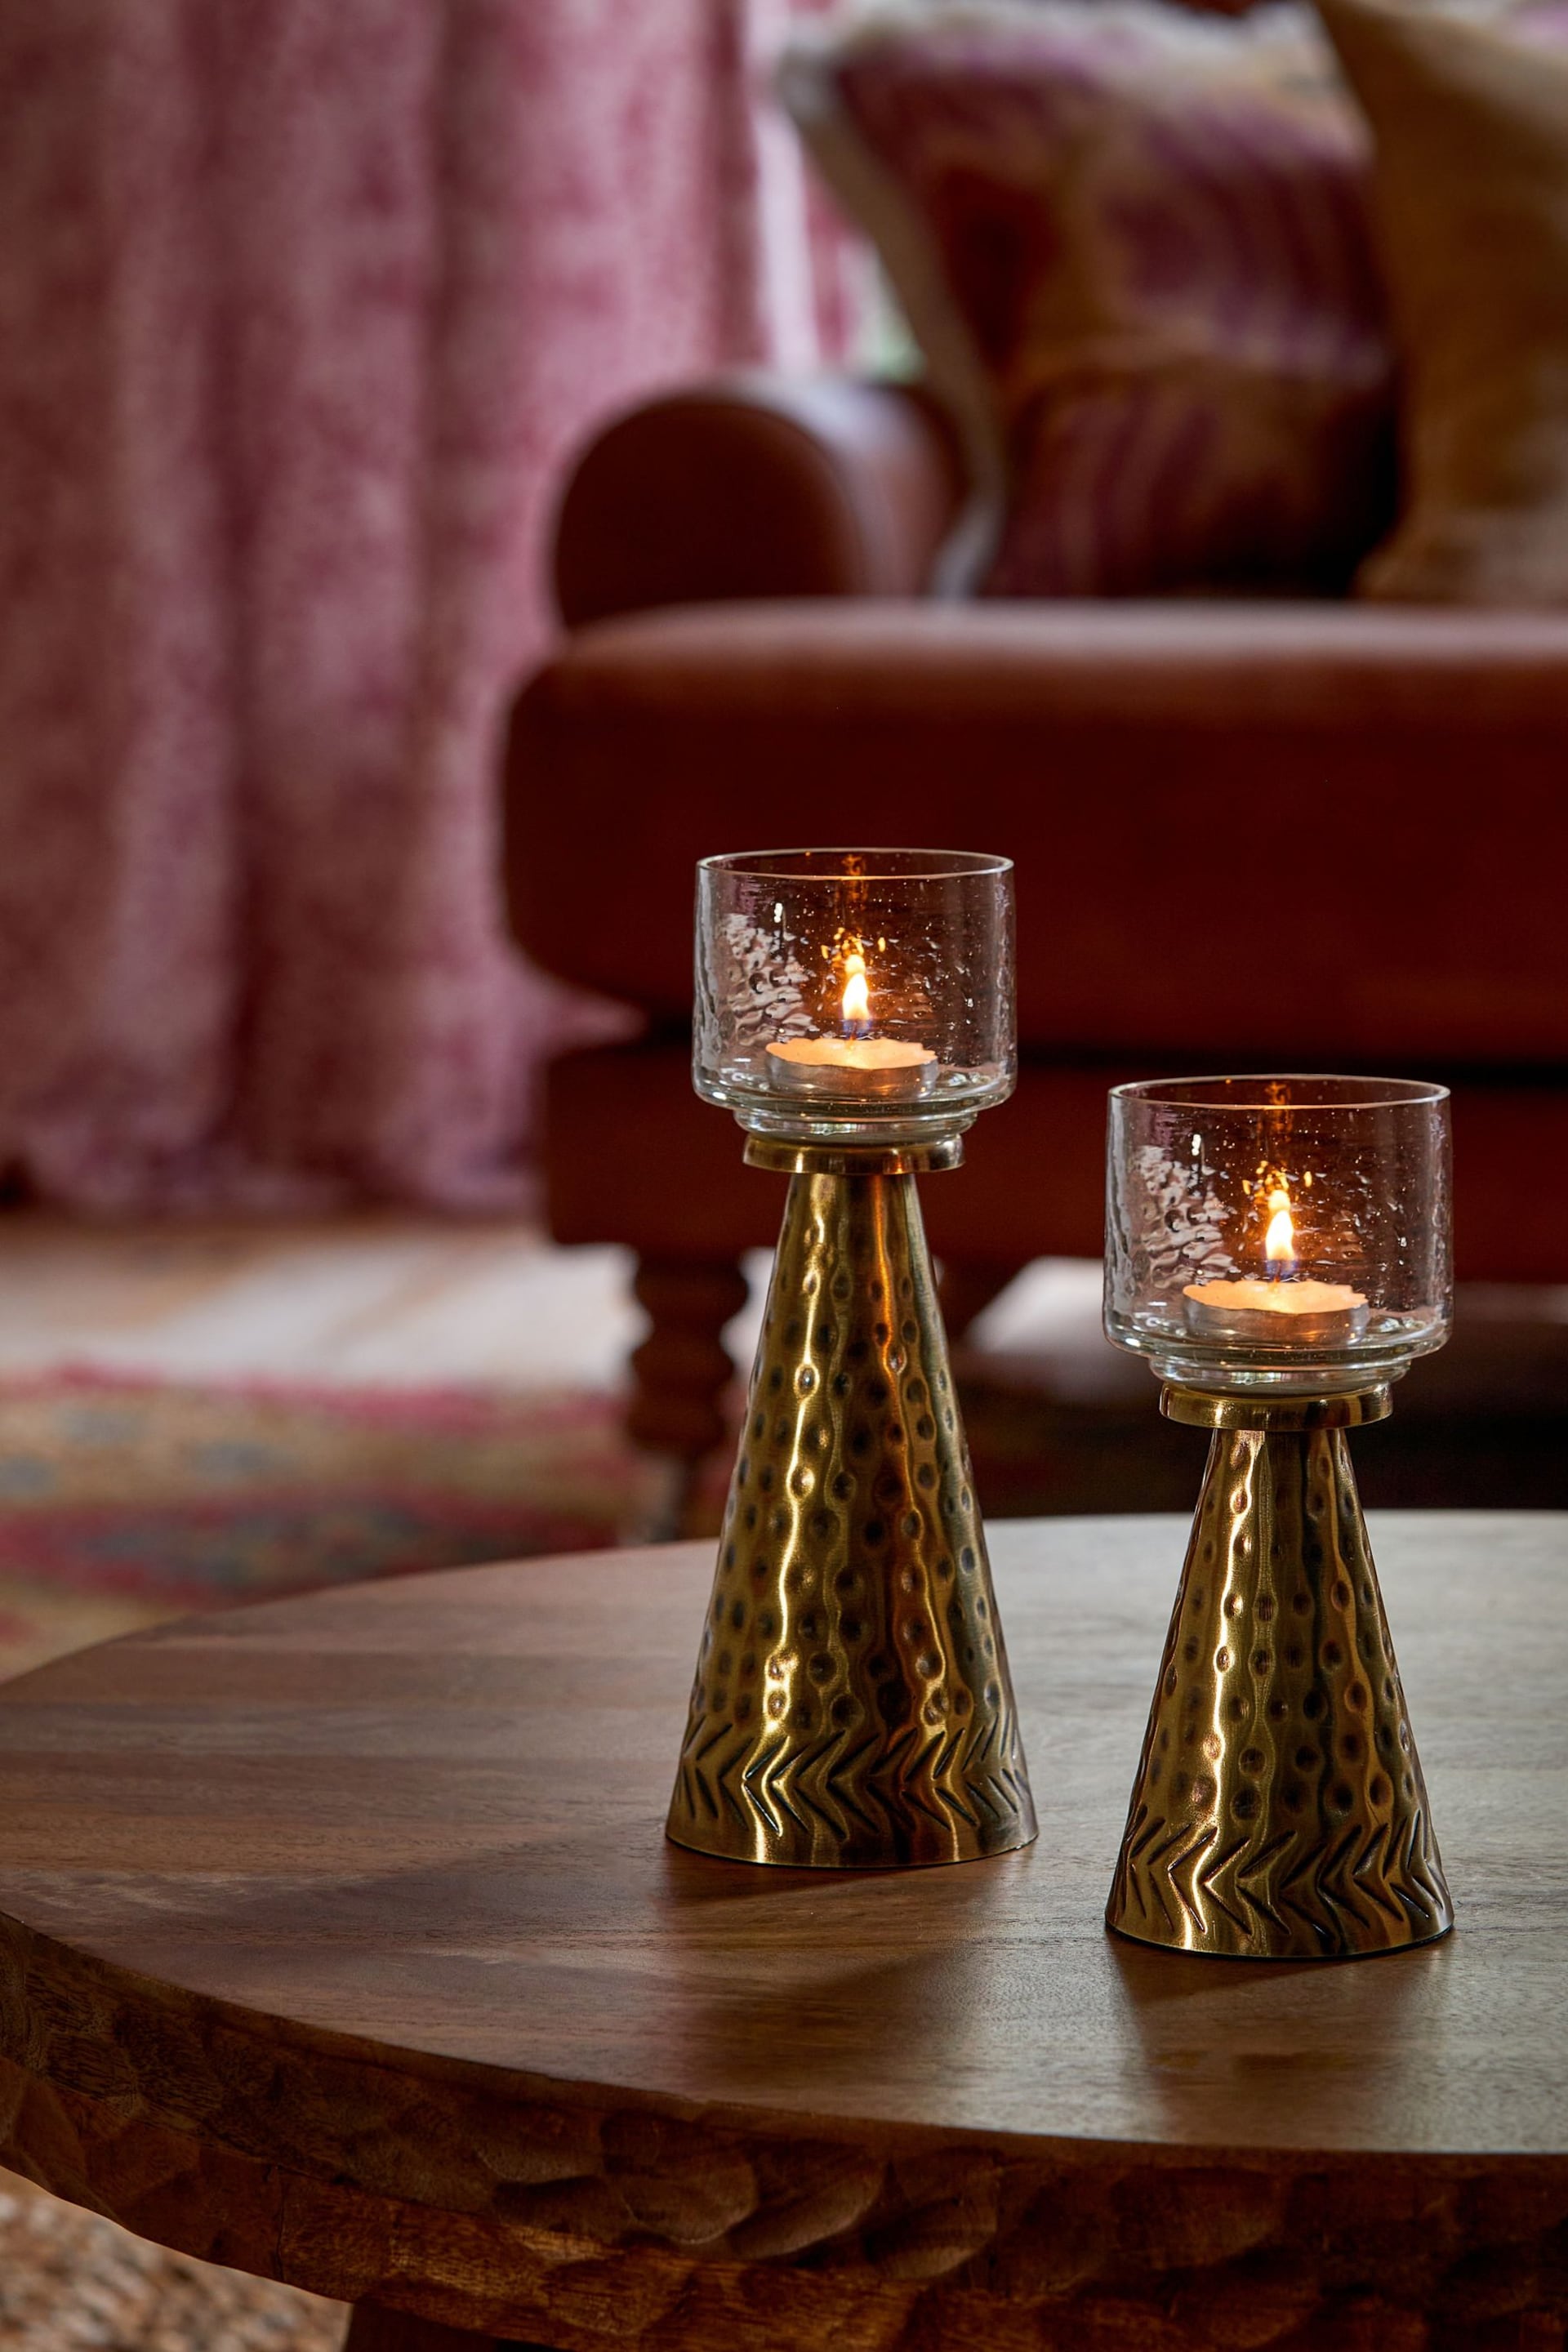 Gold Hammered Metal and Glass Tealight Candle Holder Set of 2 - Image 2 of 4